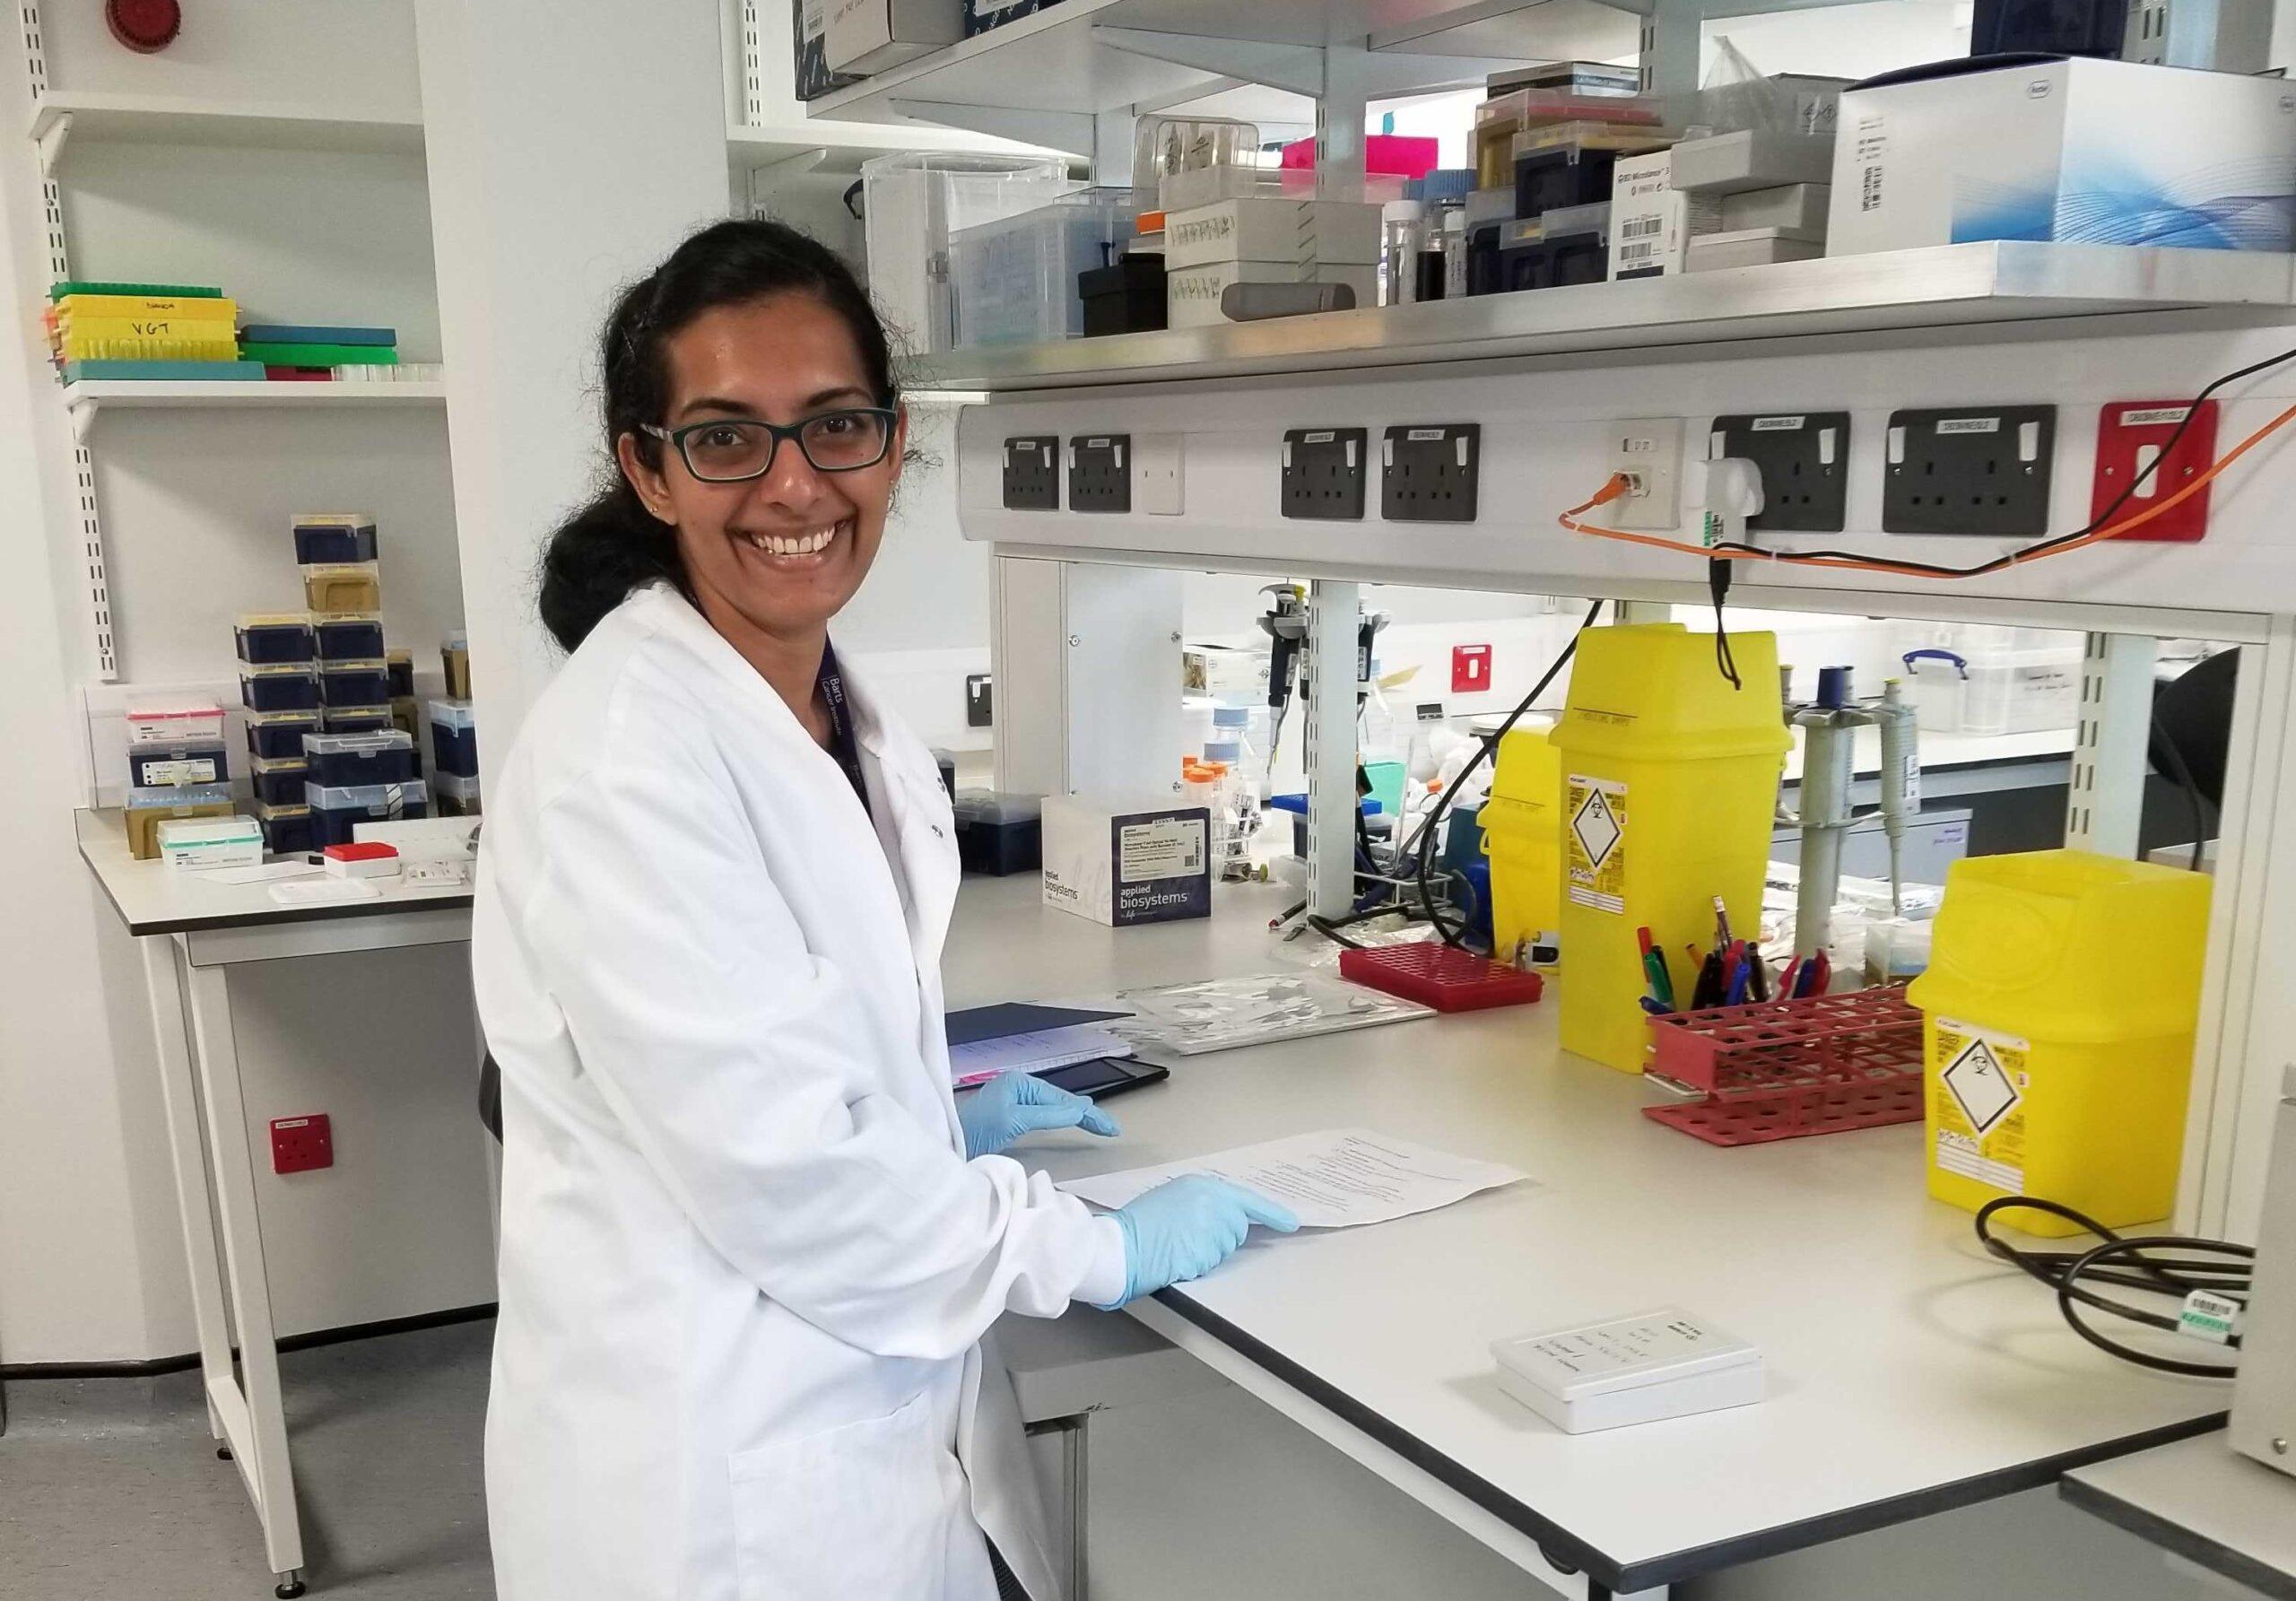 Vinaya in the laboratory at Queen Mary's Barts Cancer Institute.